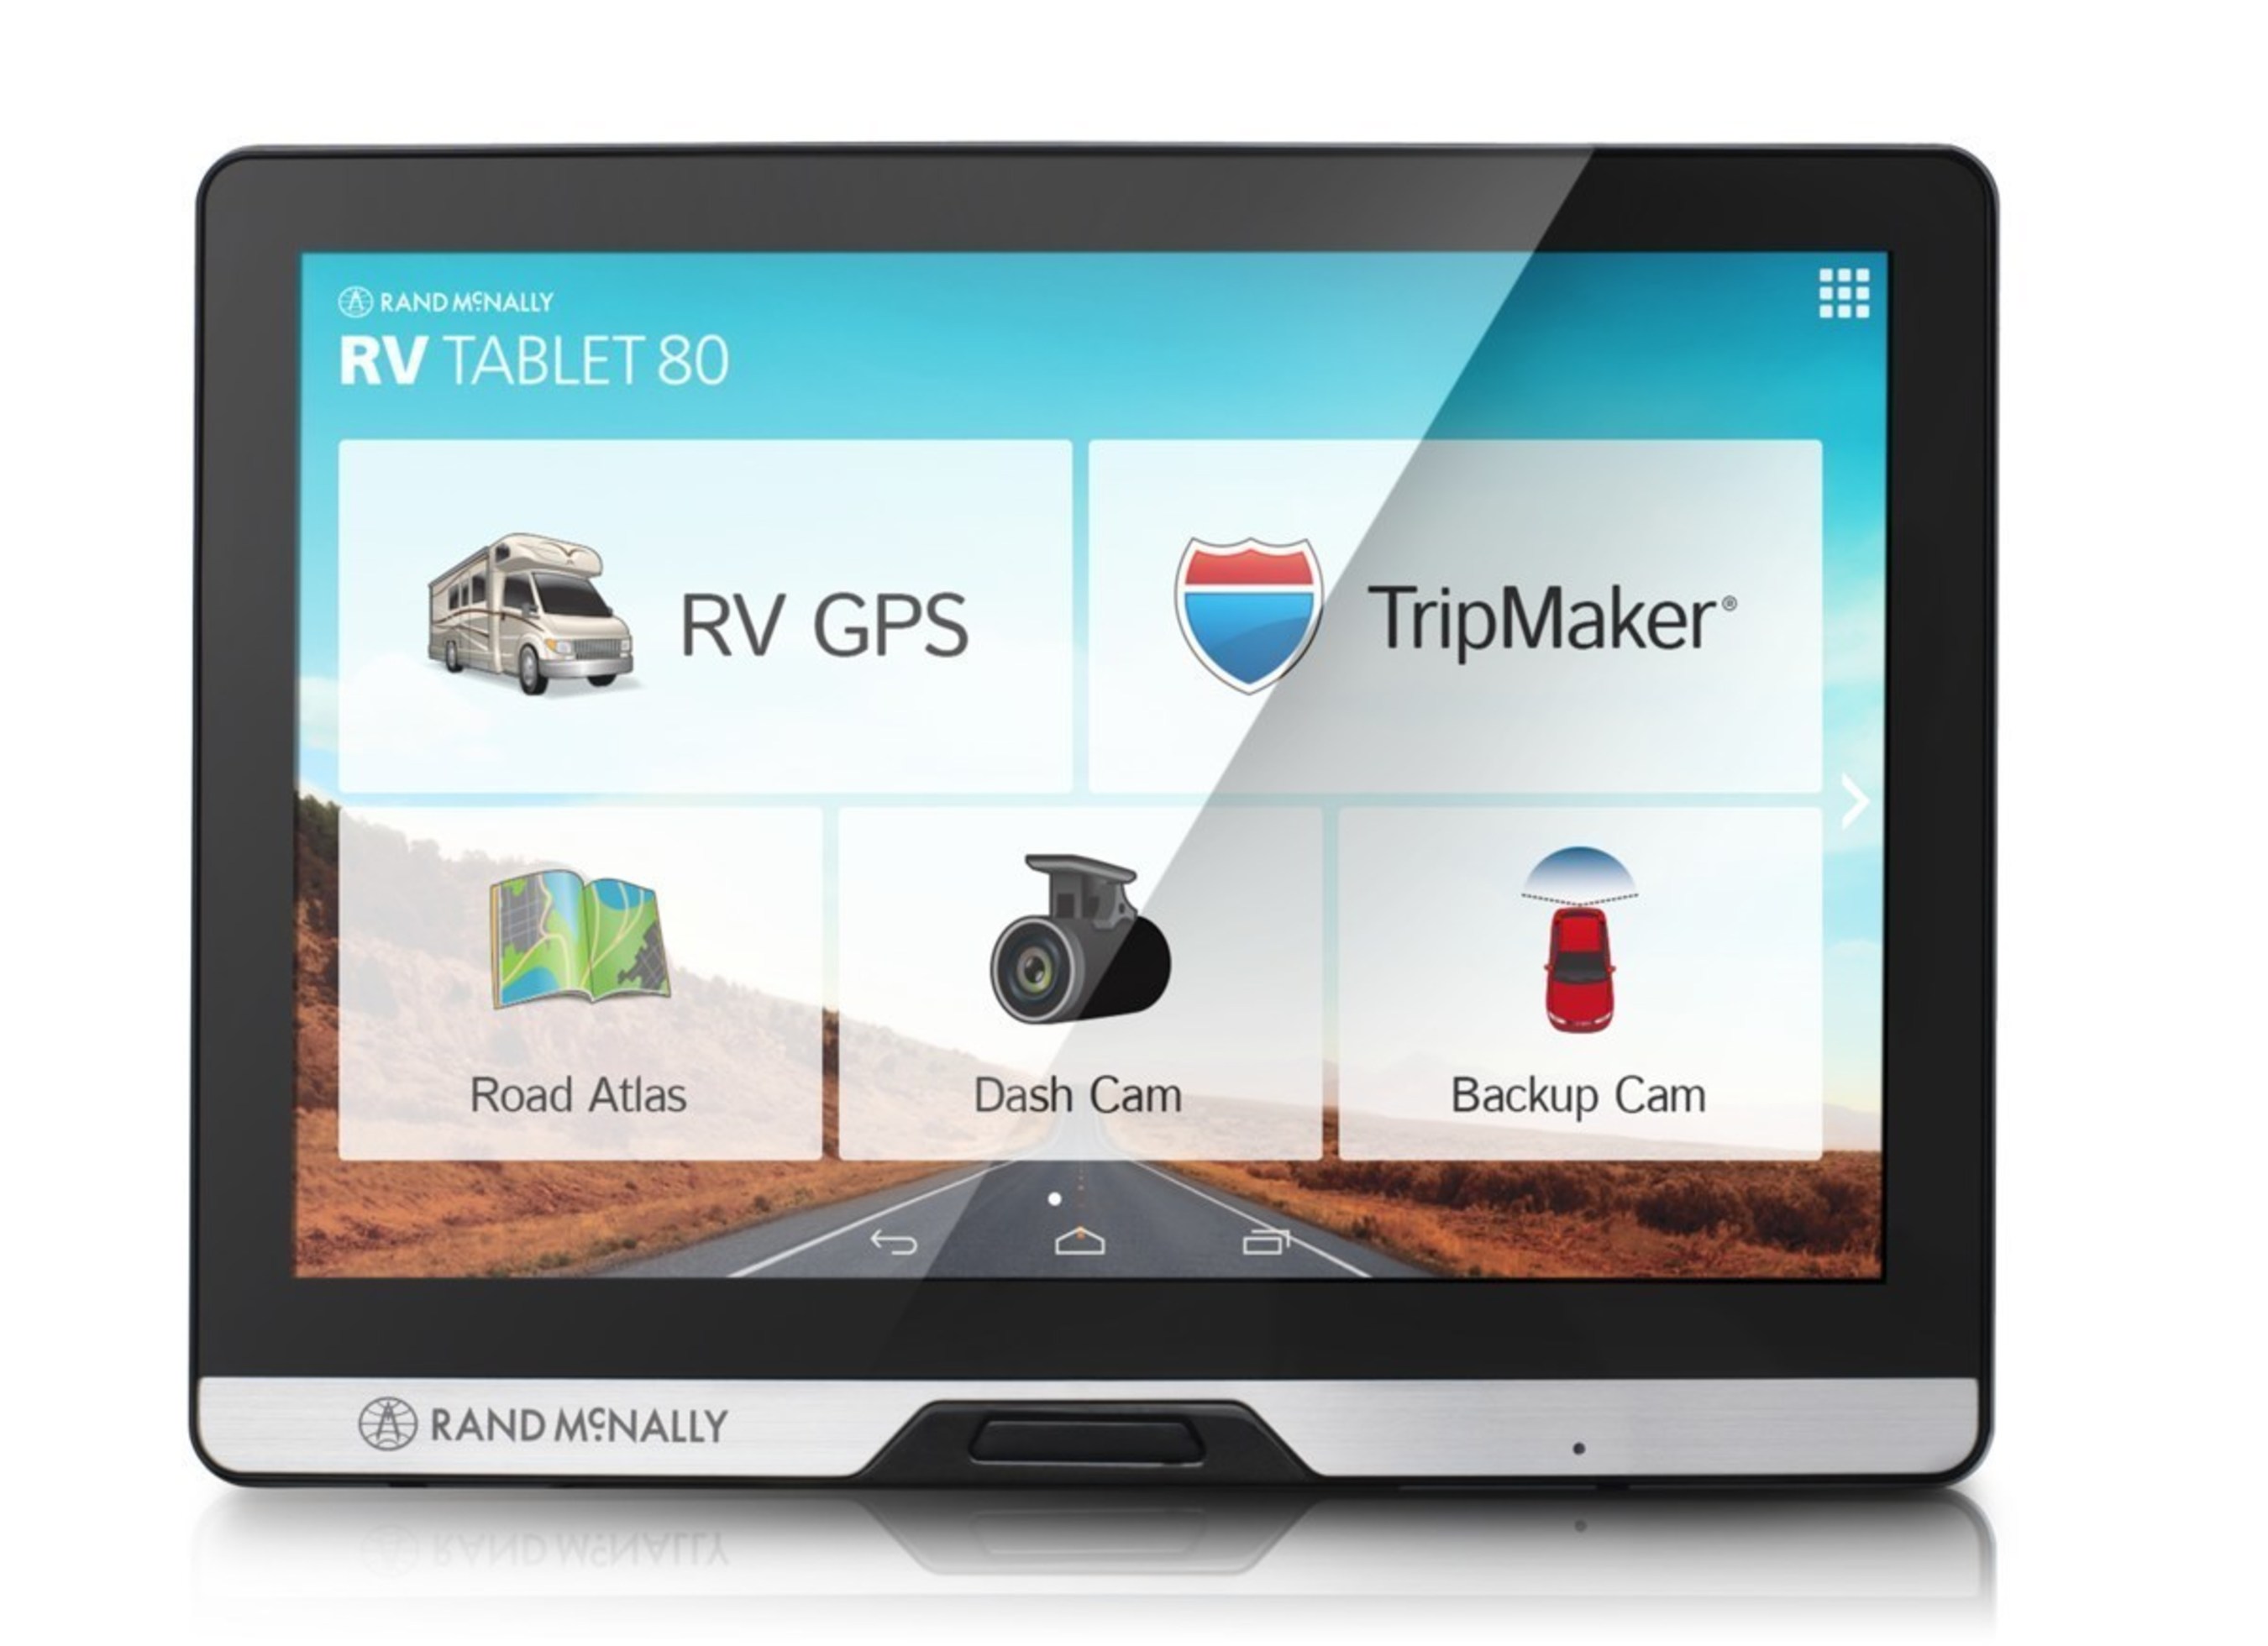 Rand McNally's new RV Tablet 80 gives RVers access to advanced RV GPS navigation and trip planning with entertainment and information - plus extras like a built-in dash cam.